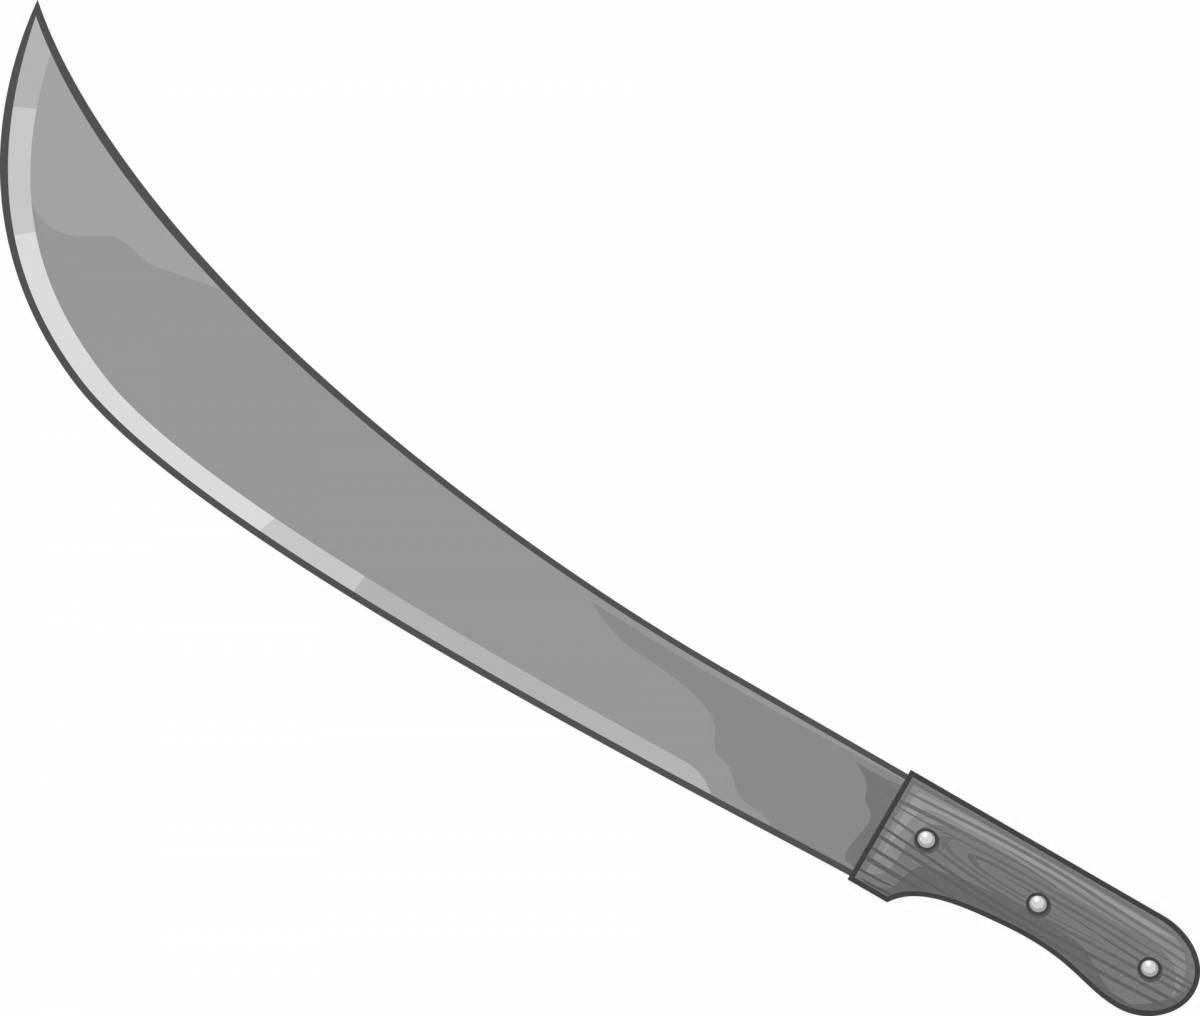 Brilliant kukri knife coloring page